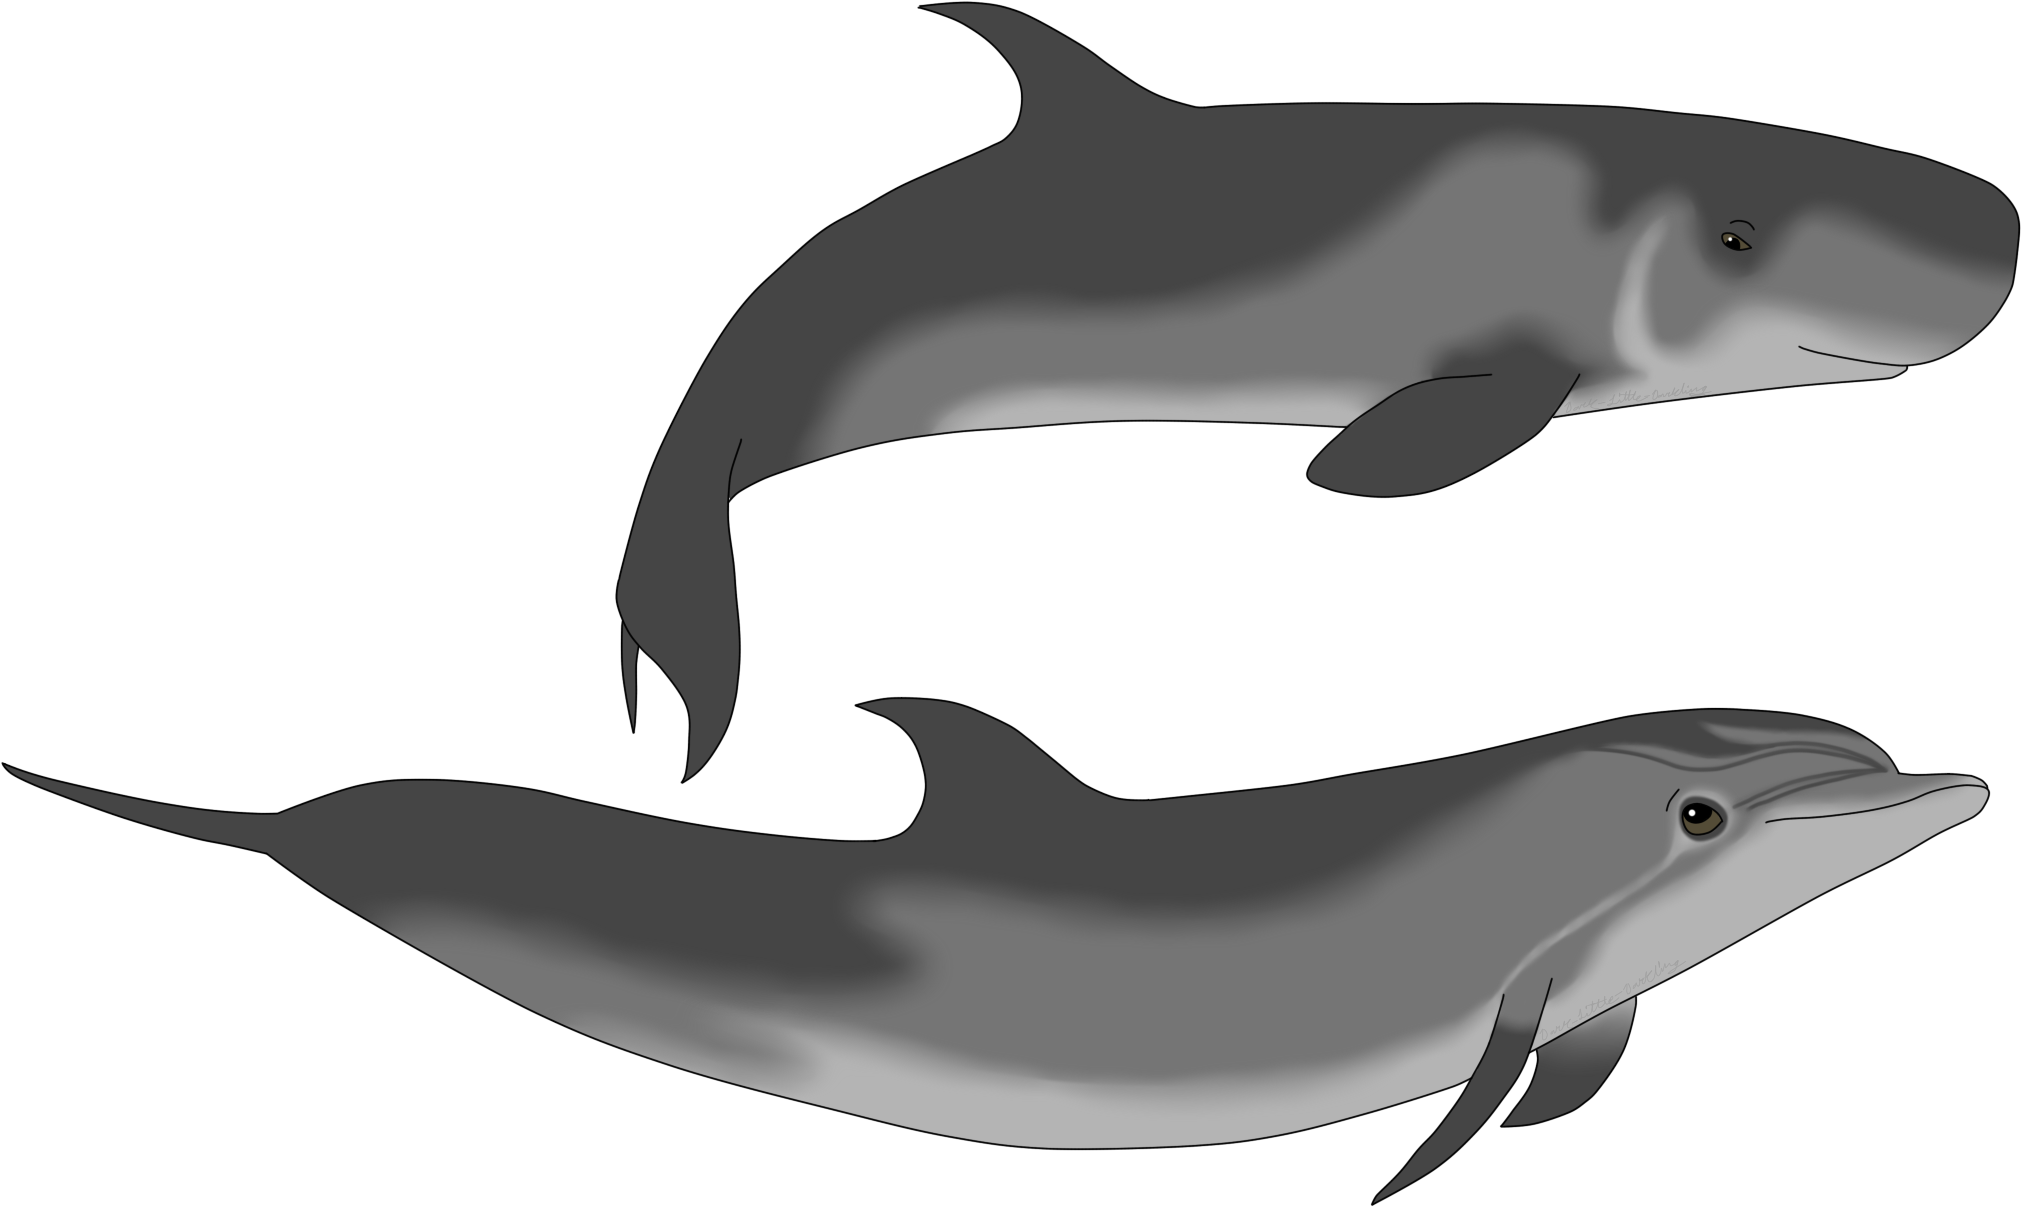 Two Dolphins Illustration